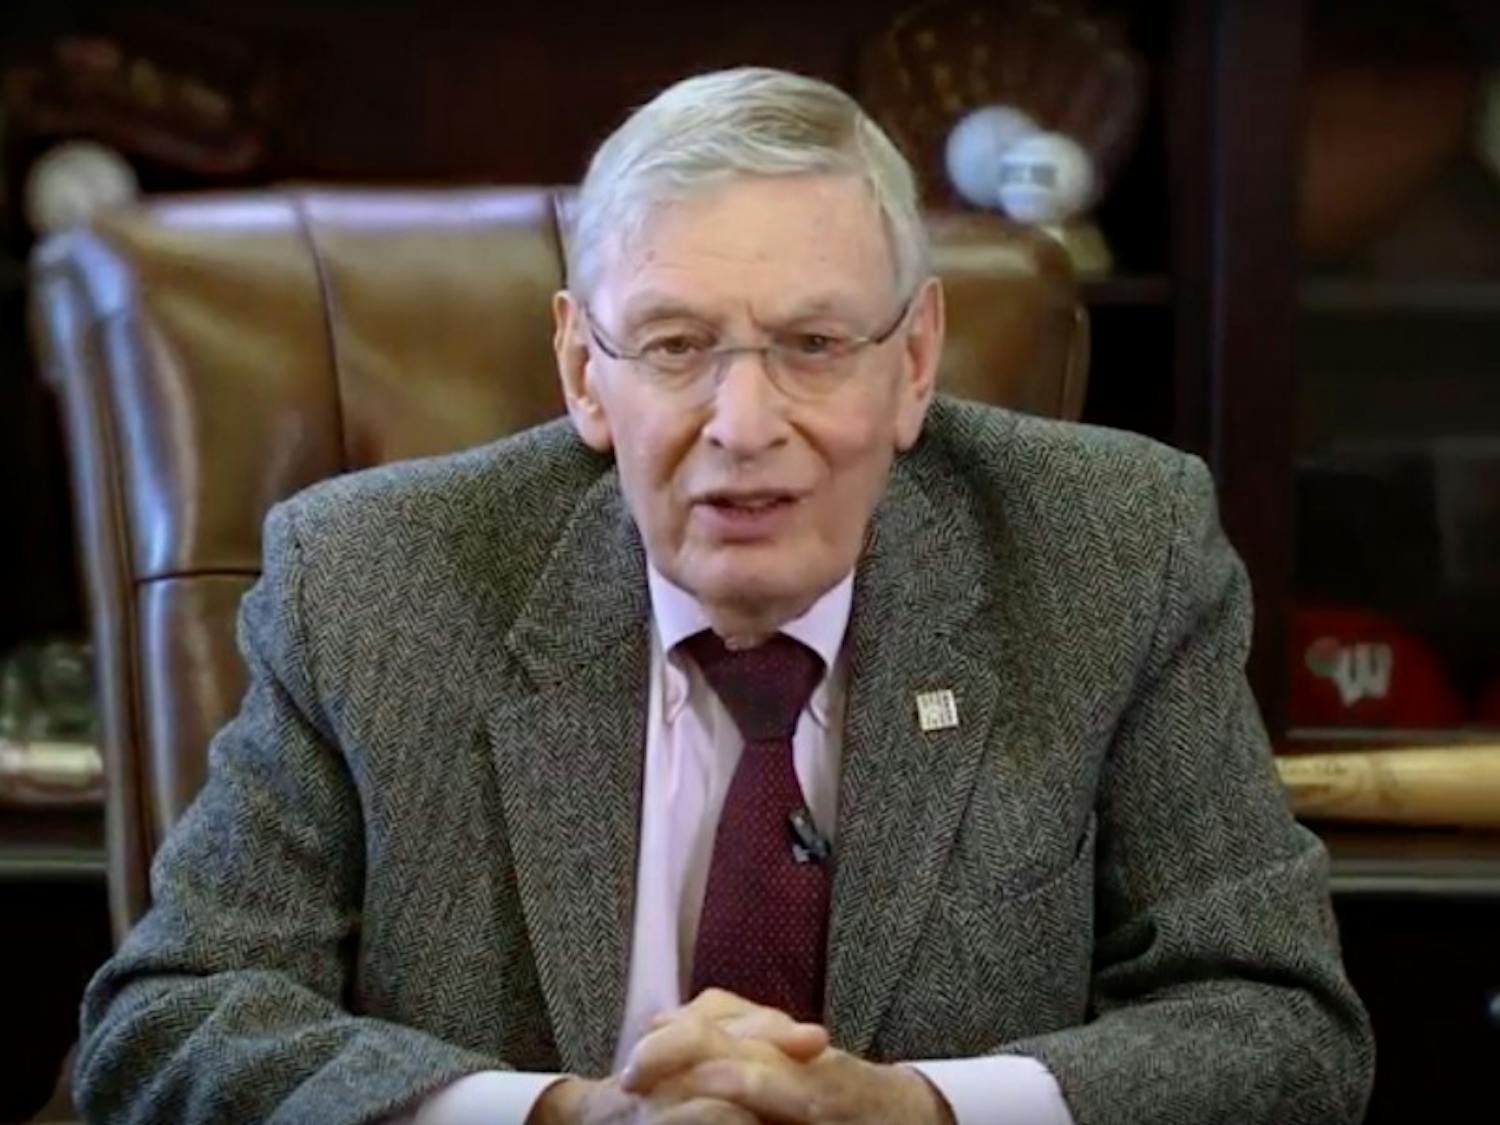 Bud Selig, a UW-Madison graduate and longtime Commissioner of Baseball, will give the commencement speech for the university’s winter graduating class of 2018.